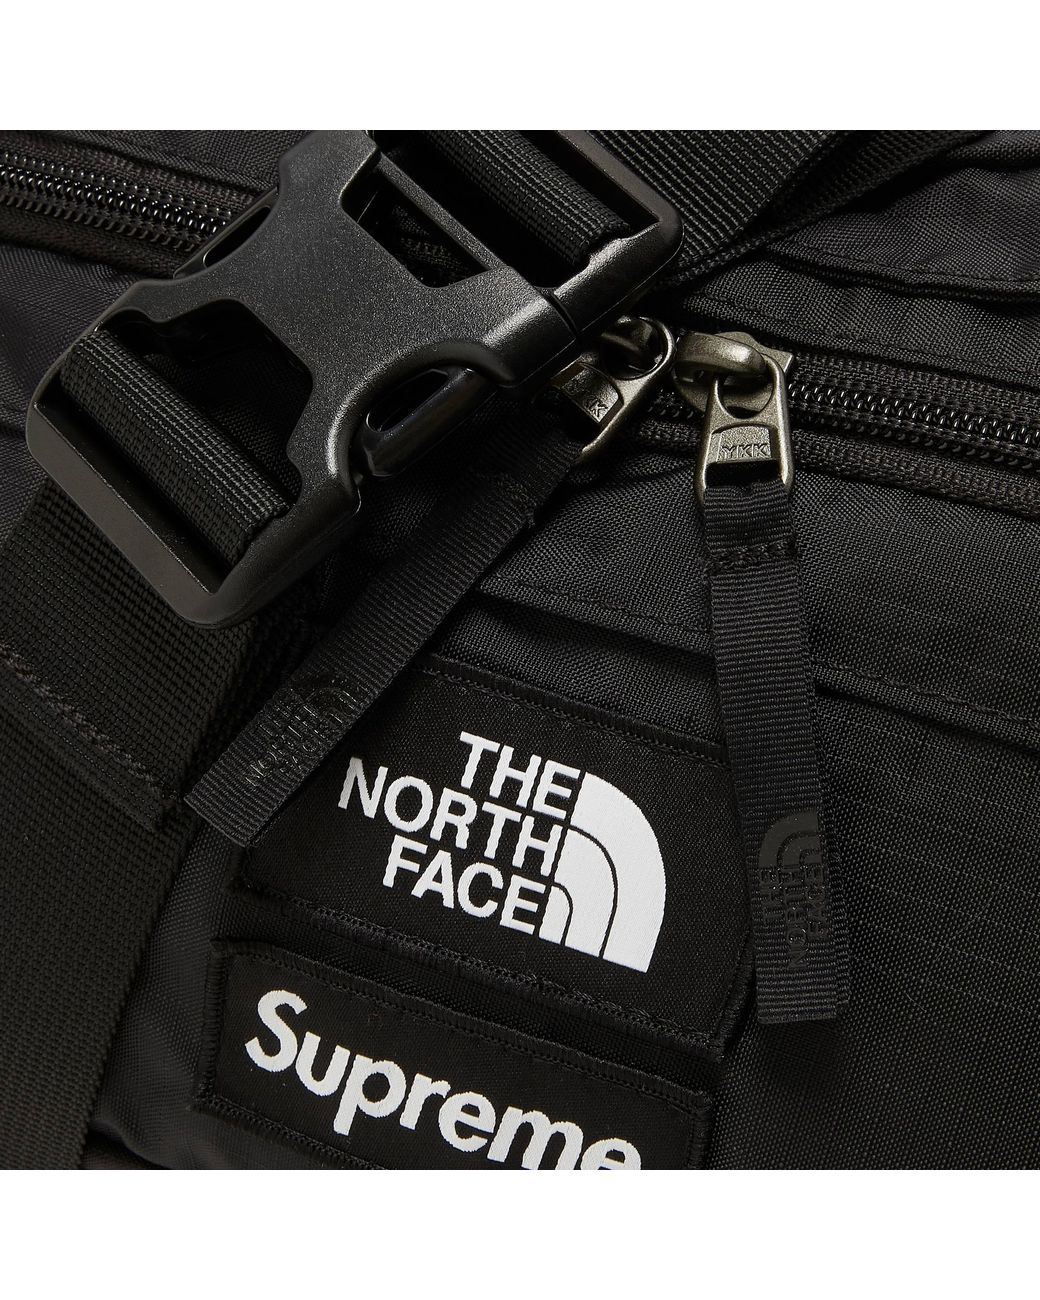 Supreme X The North Face Trekking Convertible Backpack + Waist Bag